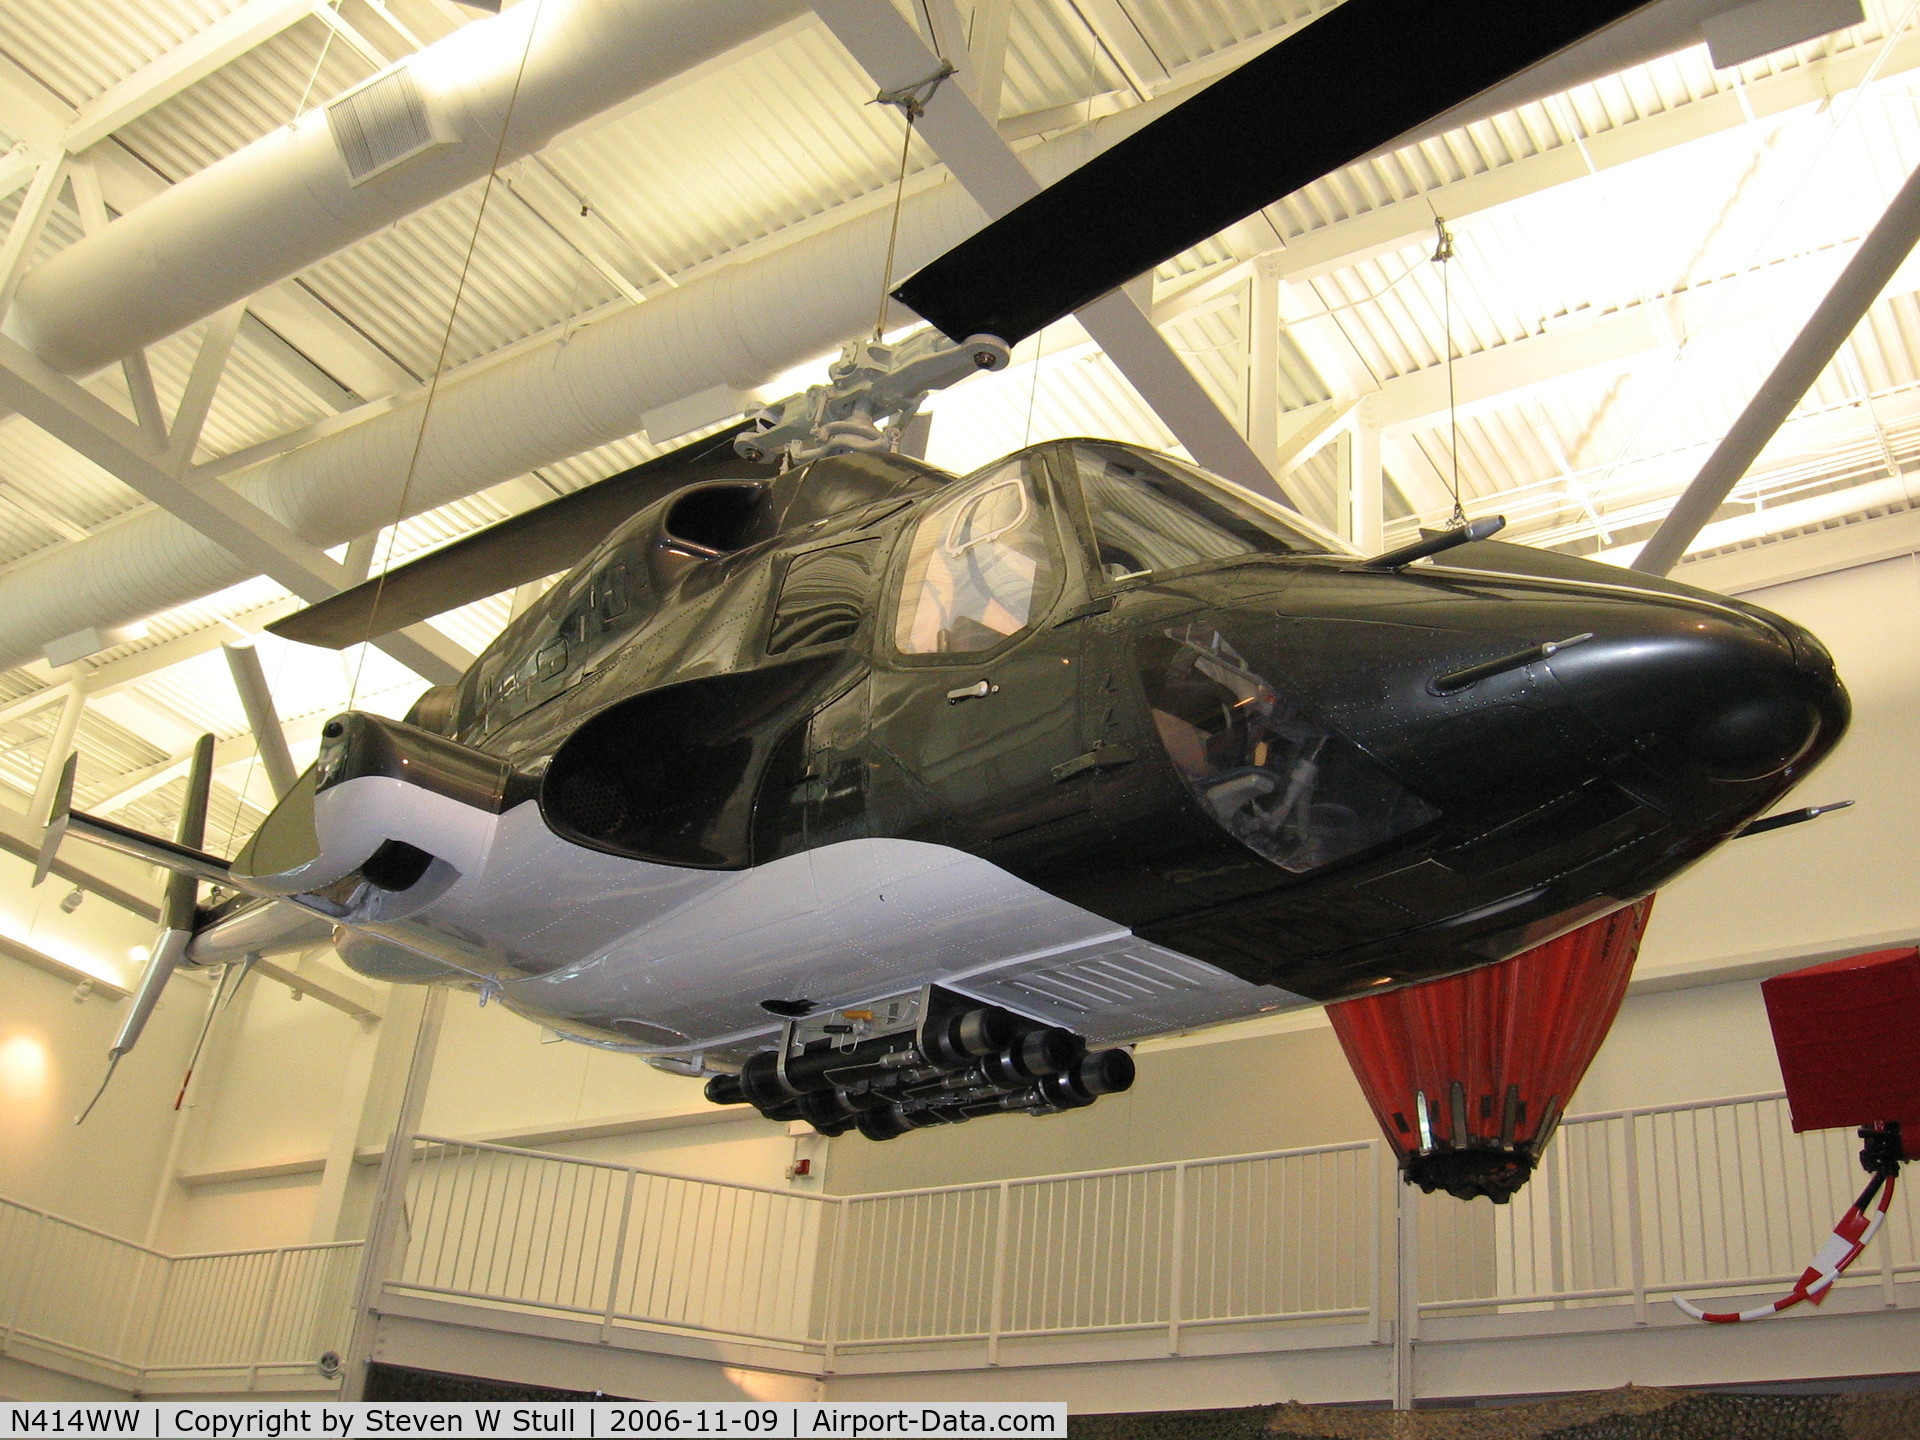 N414WW, 1980 Bell 222 C/N 47042, Hanging in Halsons Helicopter museum